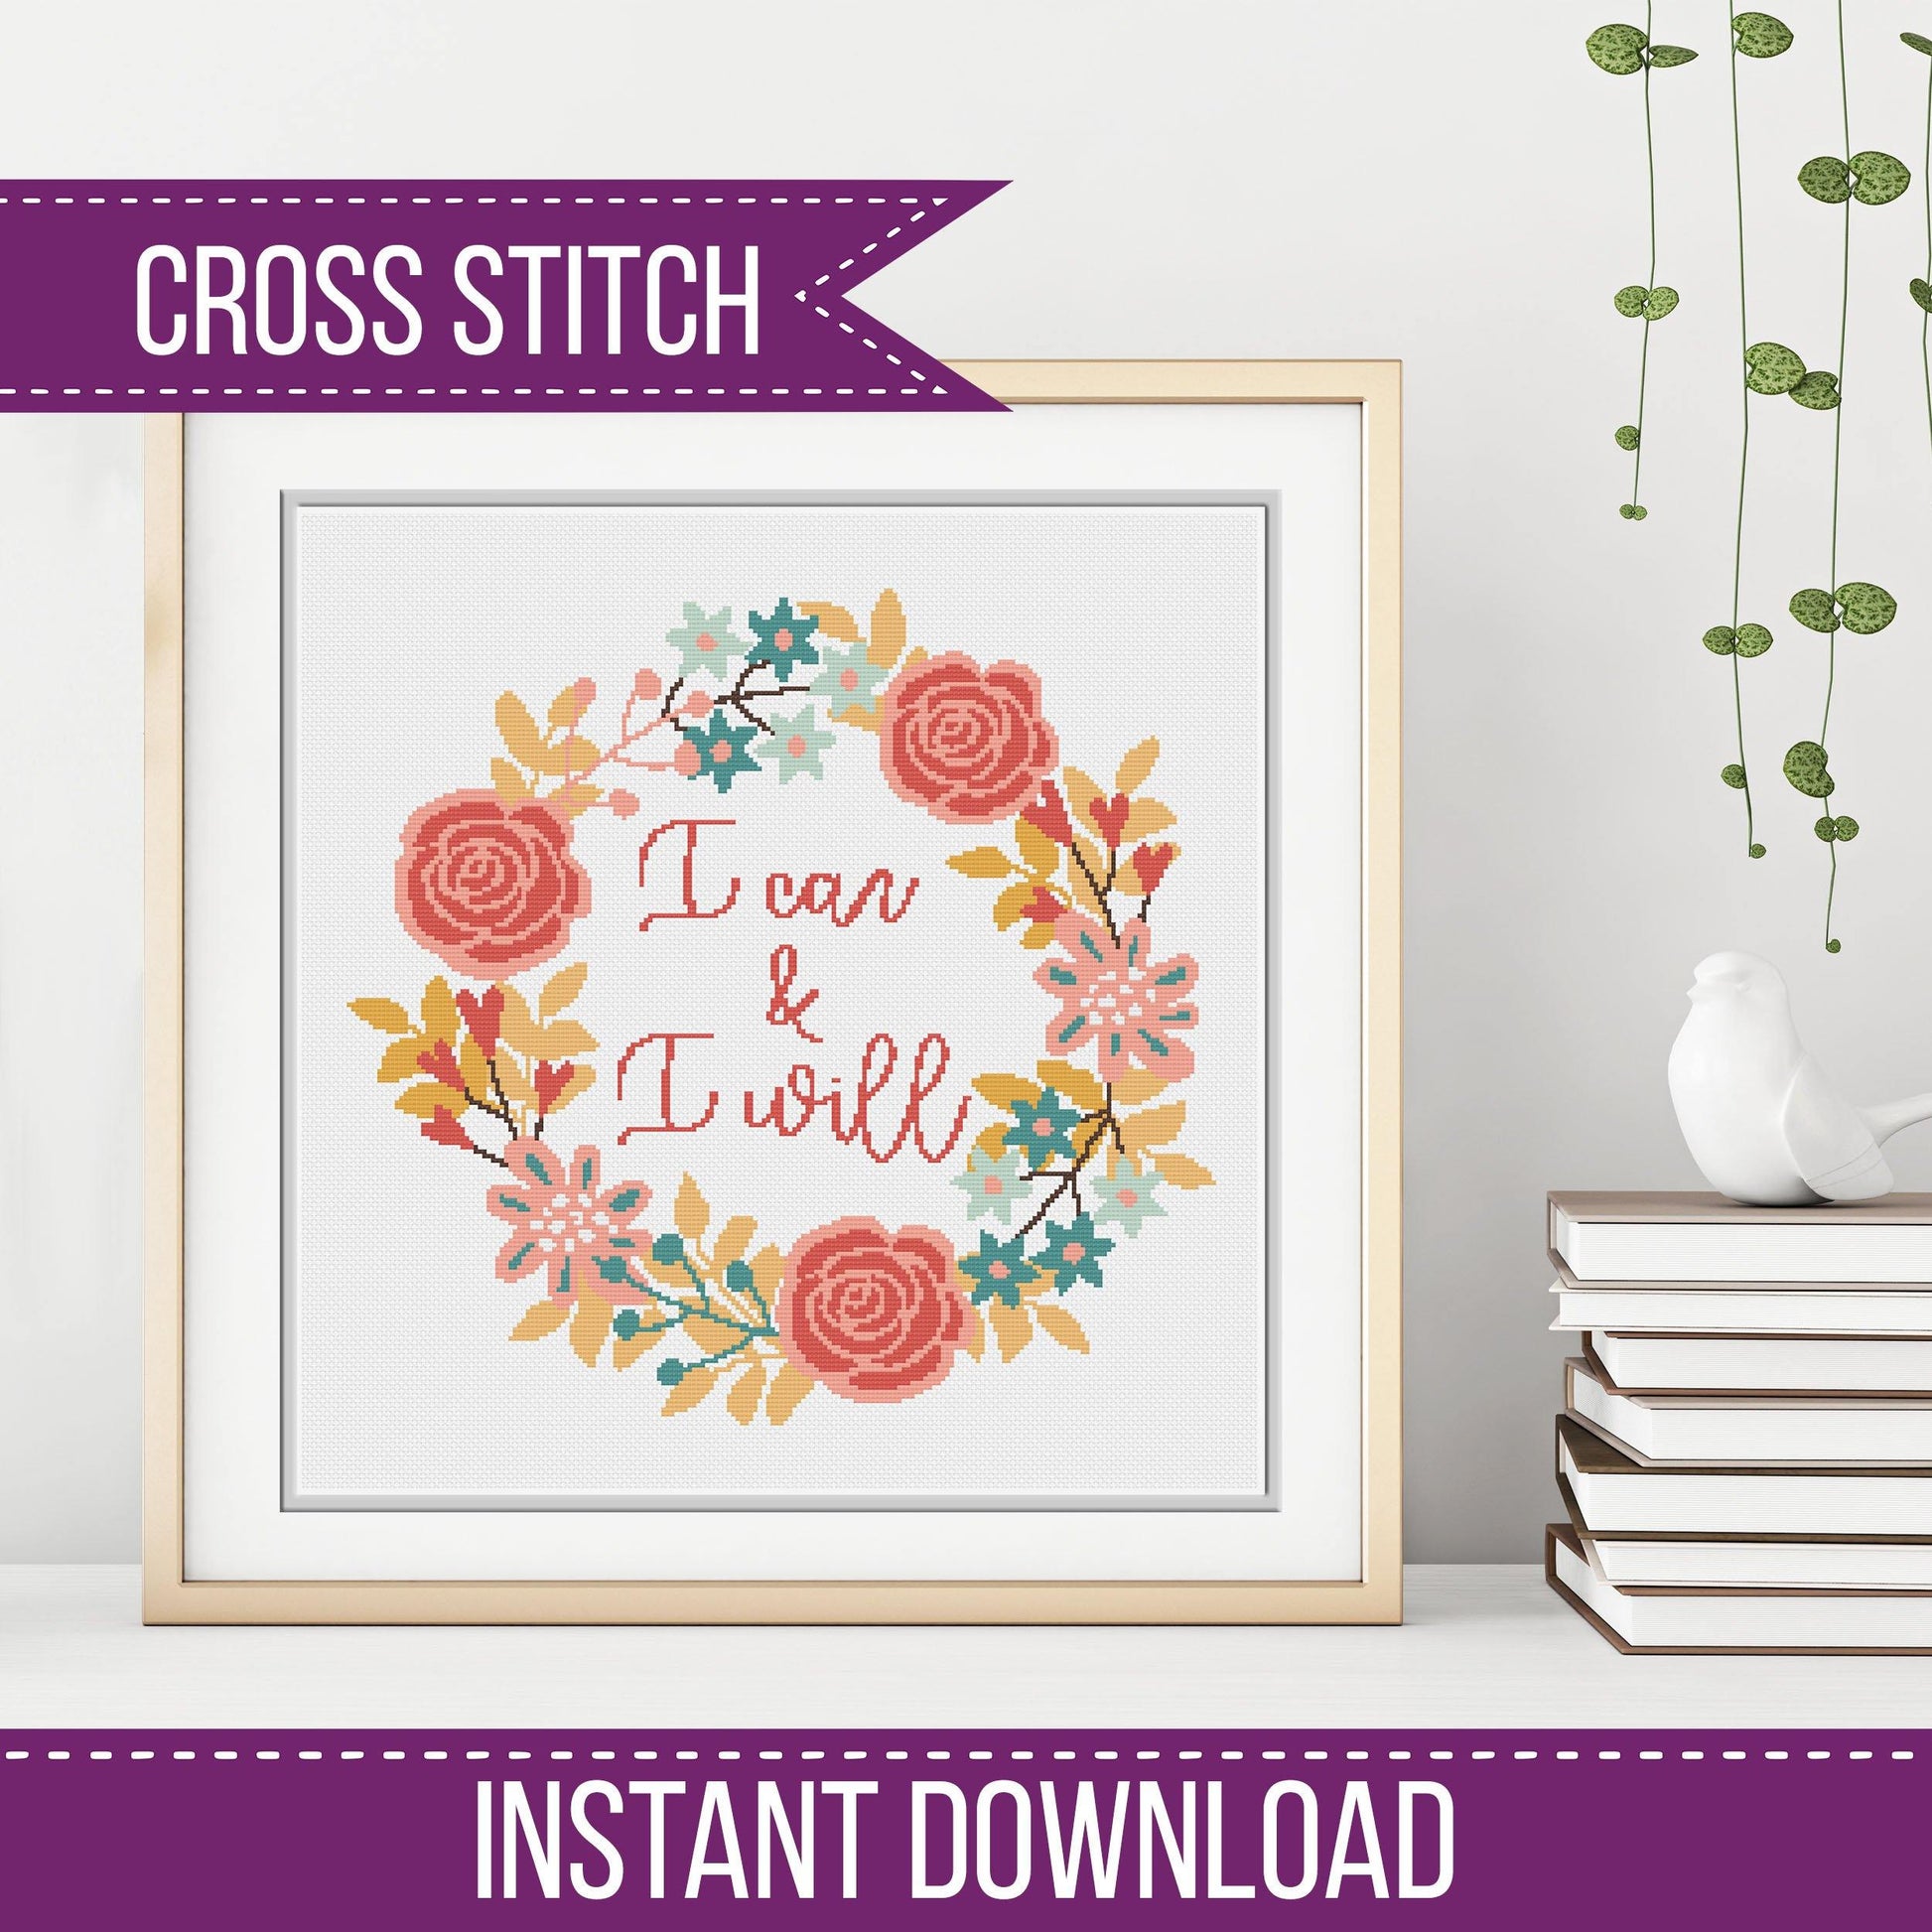 I Can & I Will - Blackwork Patterns & Cross Stitch by Peppermint Purple